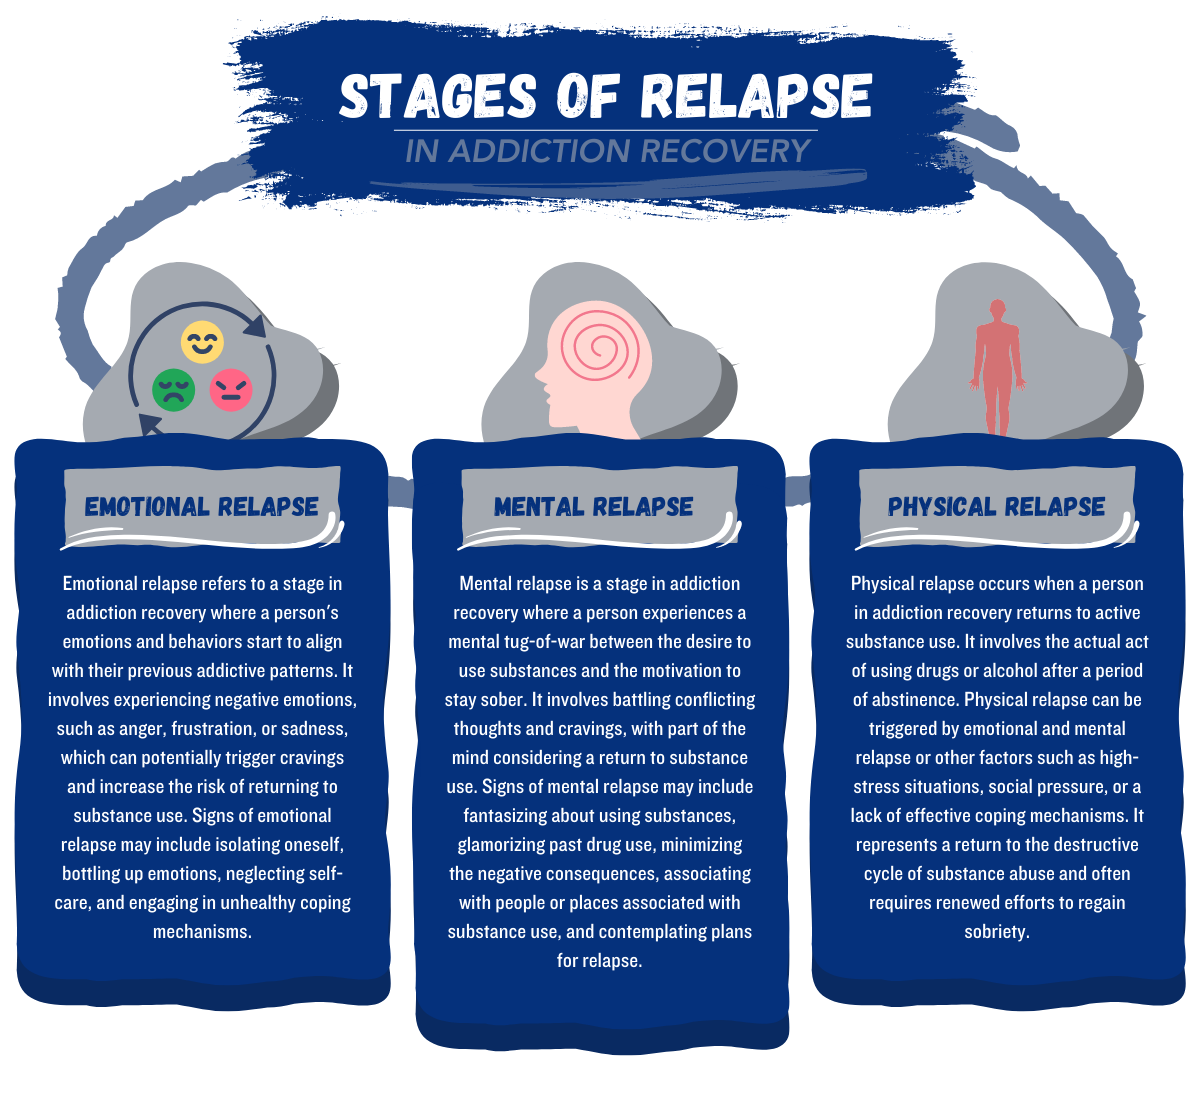 Stages of Relapse in Addiction Recovery